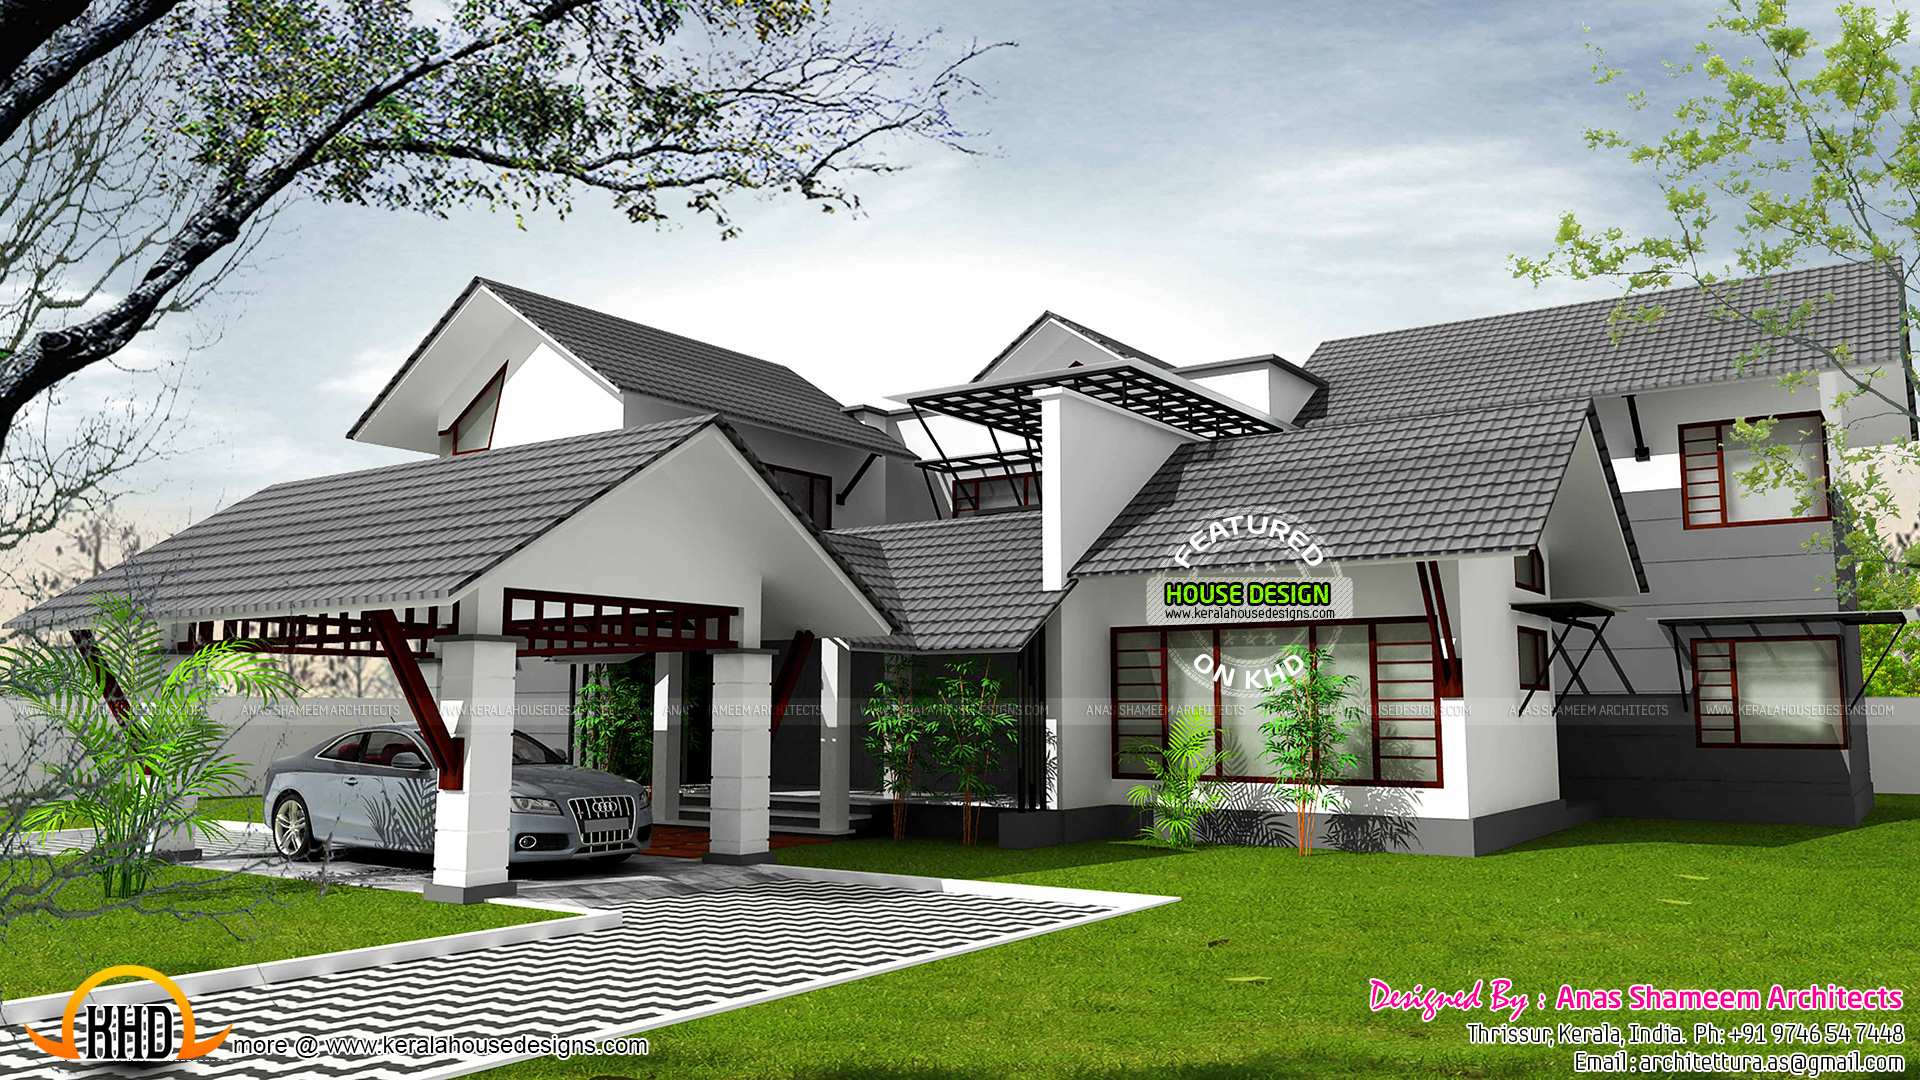 Pitched Roof House Plans Modern House